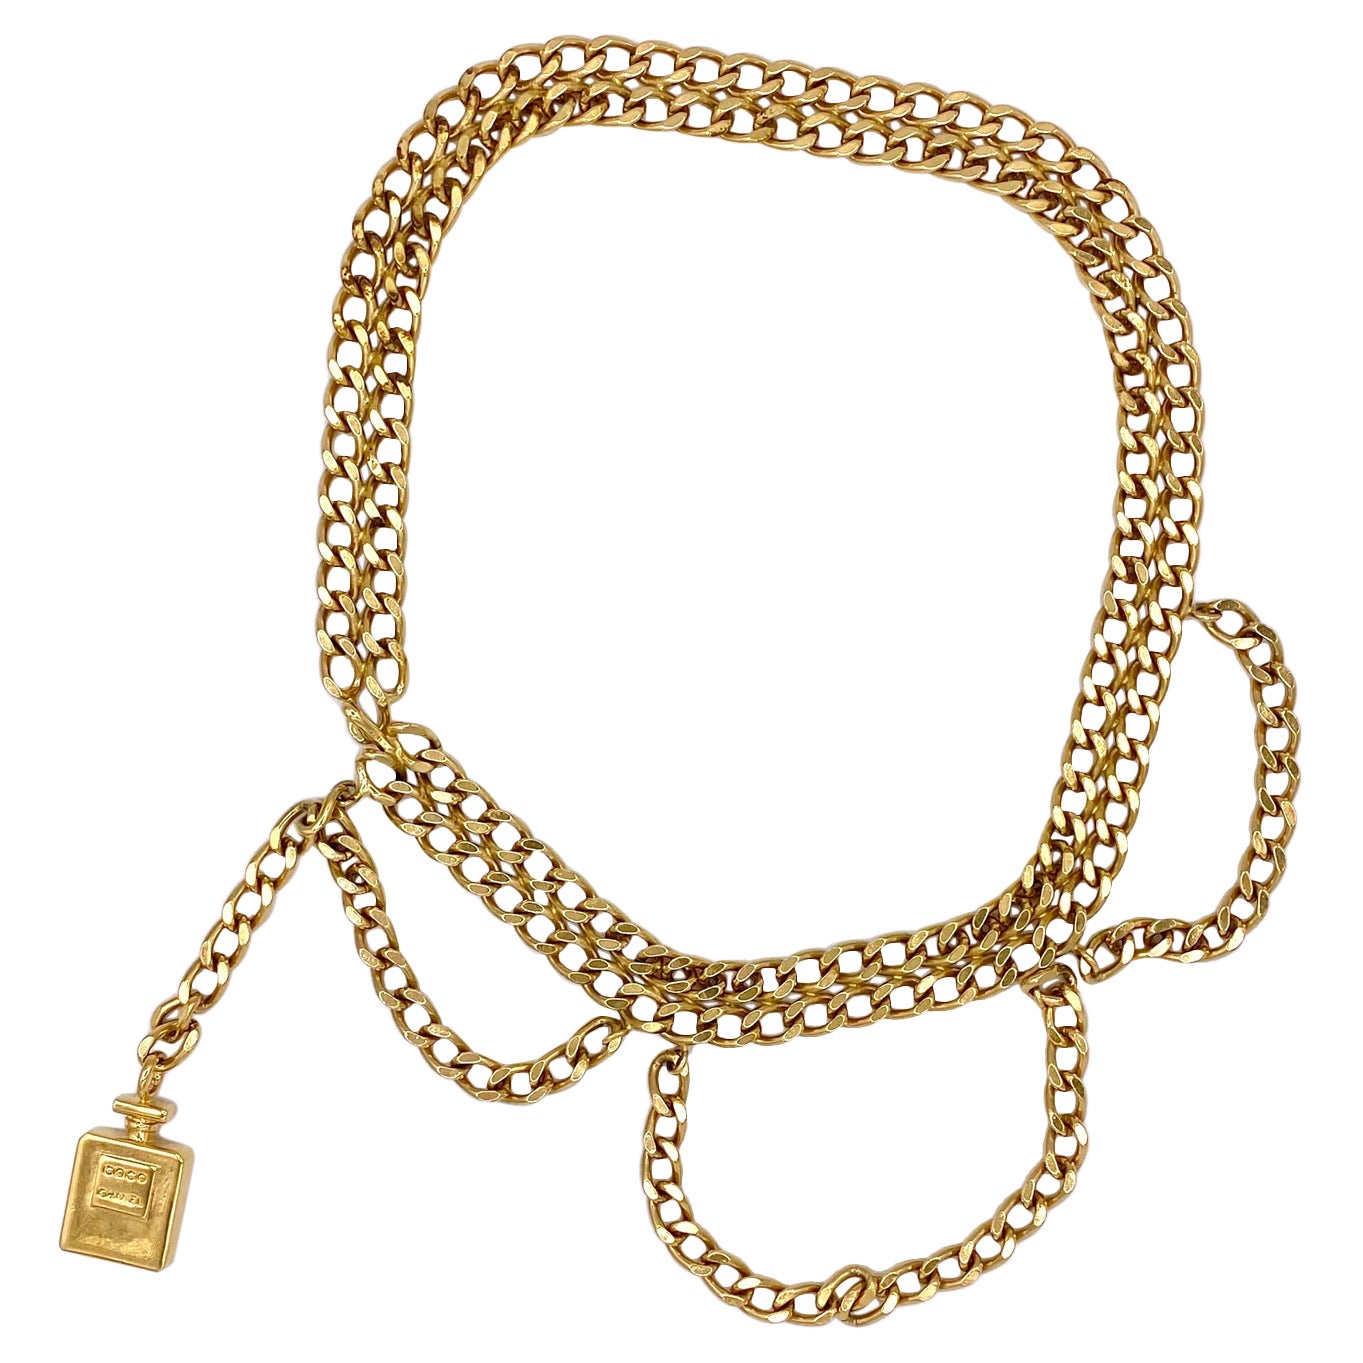 Vintage chain belt, draped with Chanel perfume bottle